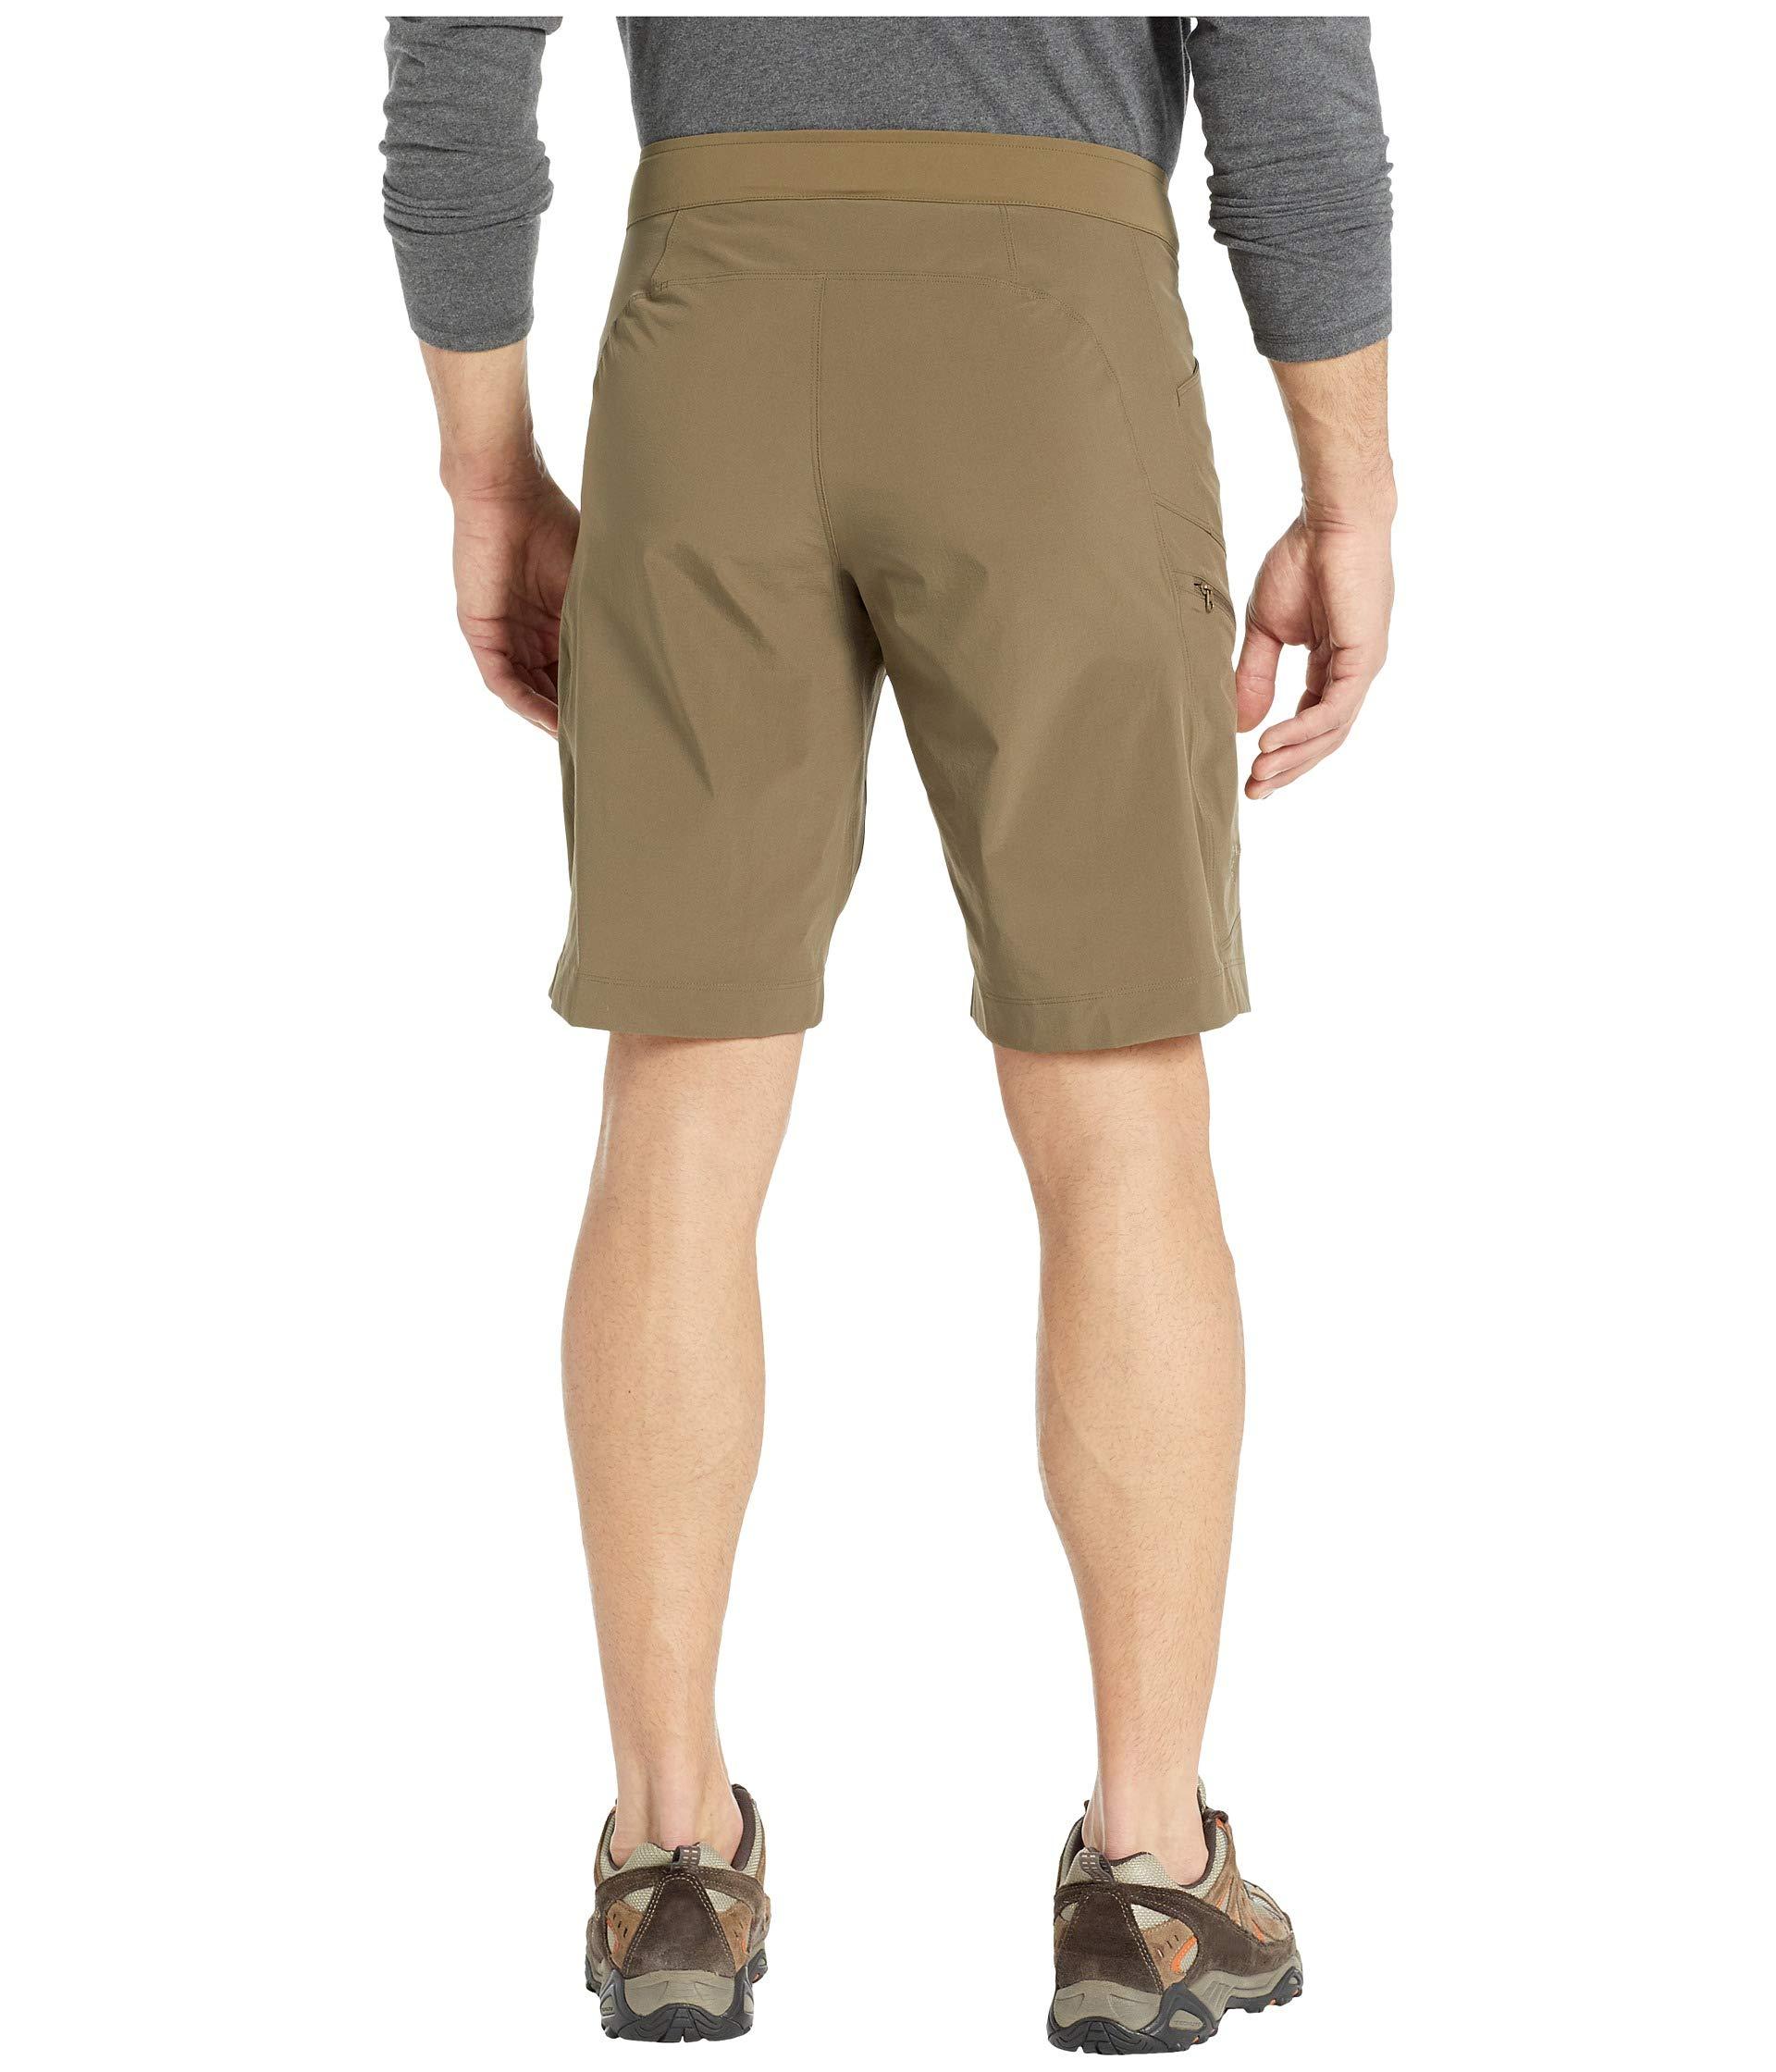 Lefroy Shorts Deals, 52% OFF | www.hcb.cat